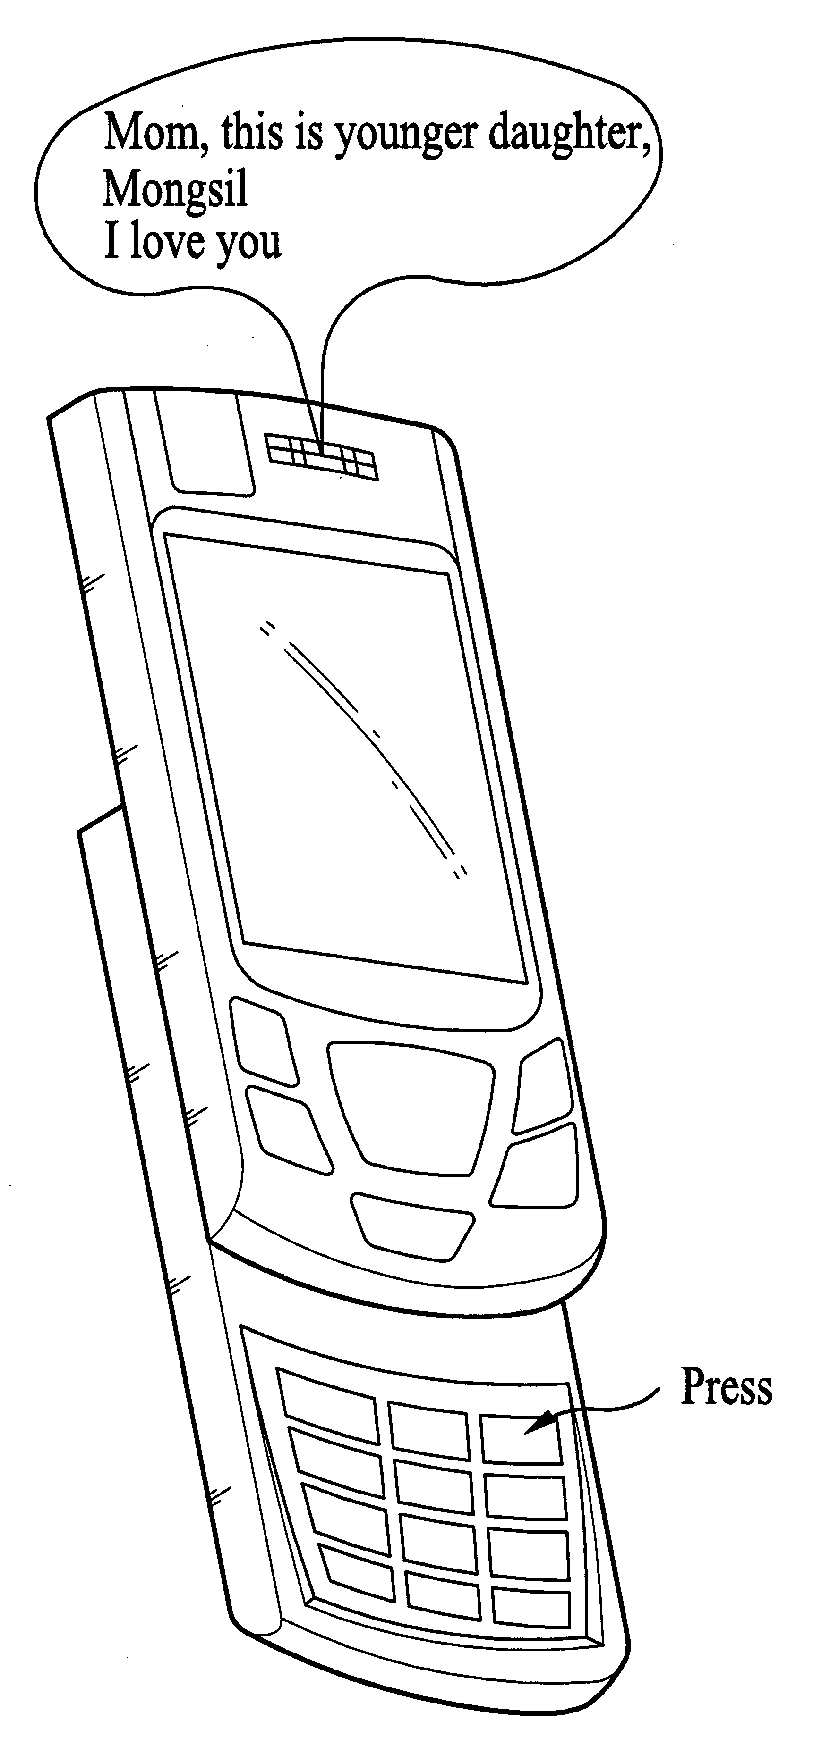 Mobile communication terminal and a method for placing a call